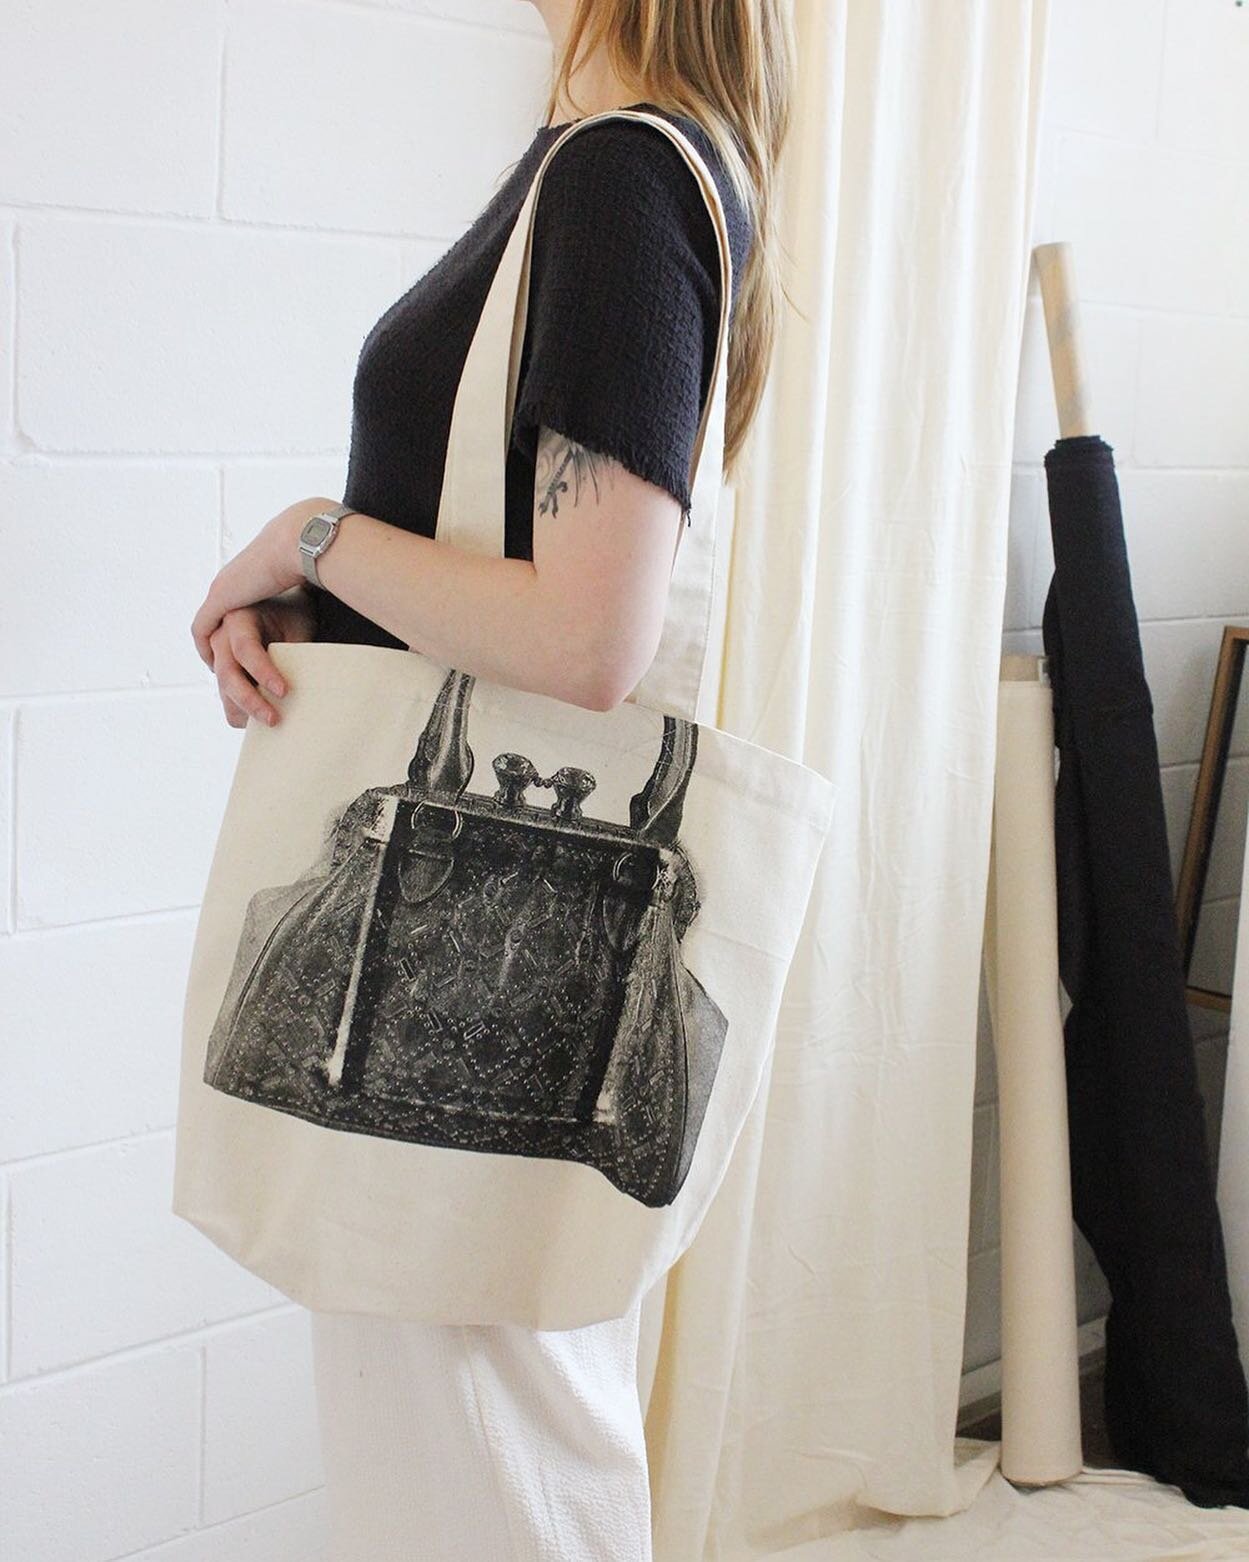 The I Am Fancy Tote for when you &ldquo;feel like you want to be fancy but know you&rsquo;re not&rdquo; (BRB, 2022). Organic cotton tote available in black or natural canvas, with long straps and an internal pocket.